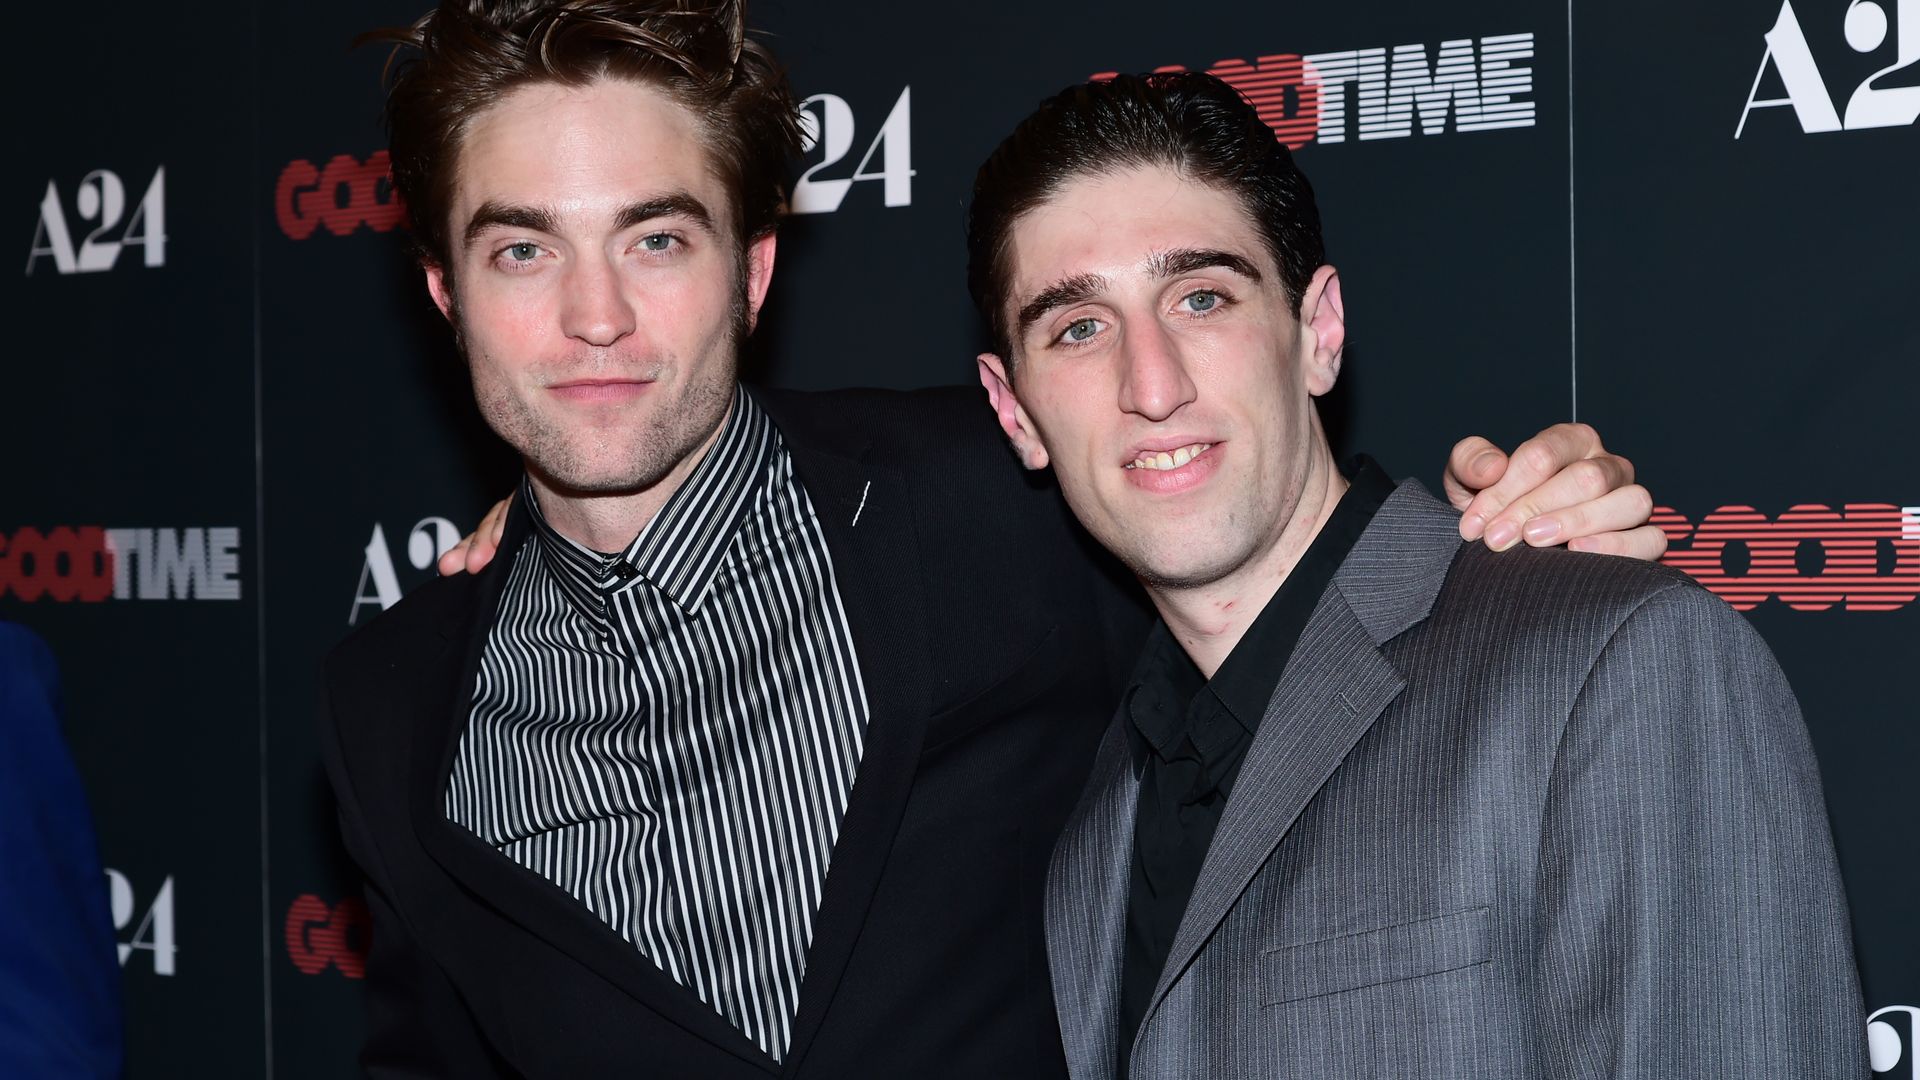 Robert Pattinson's co-star in Good Times Buddy Duress dies aged 38 - cause  revealed